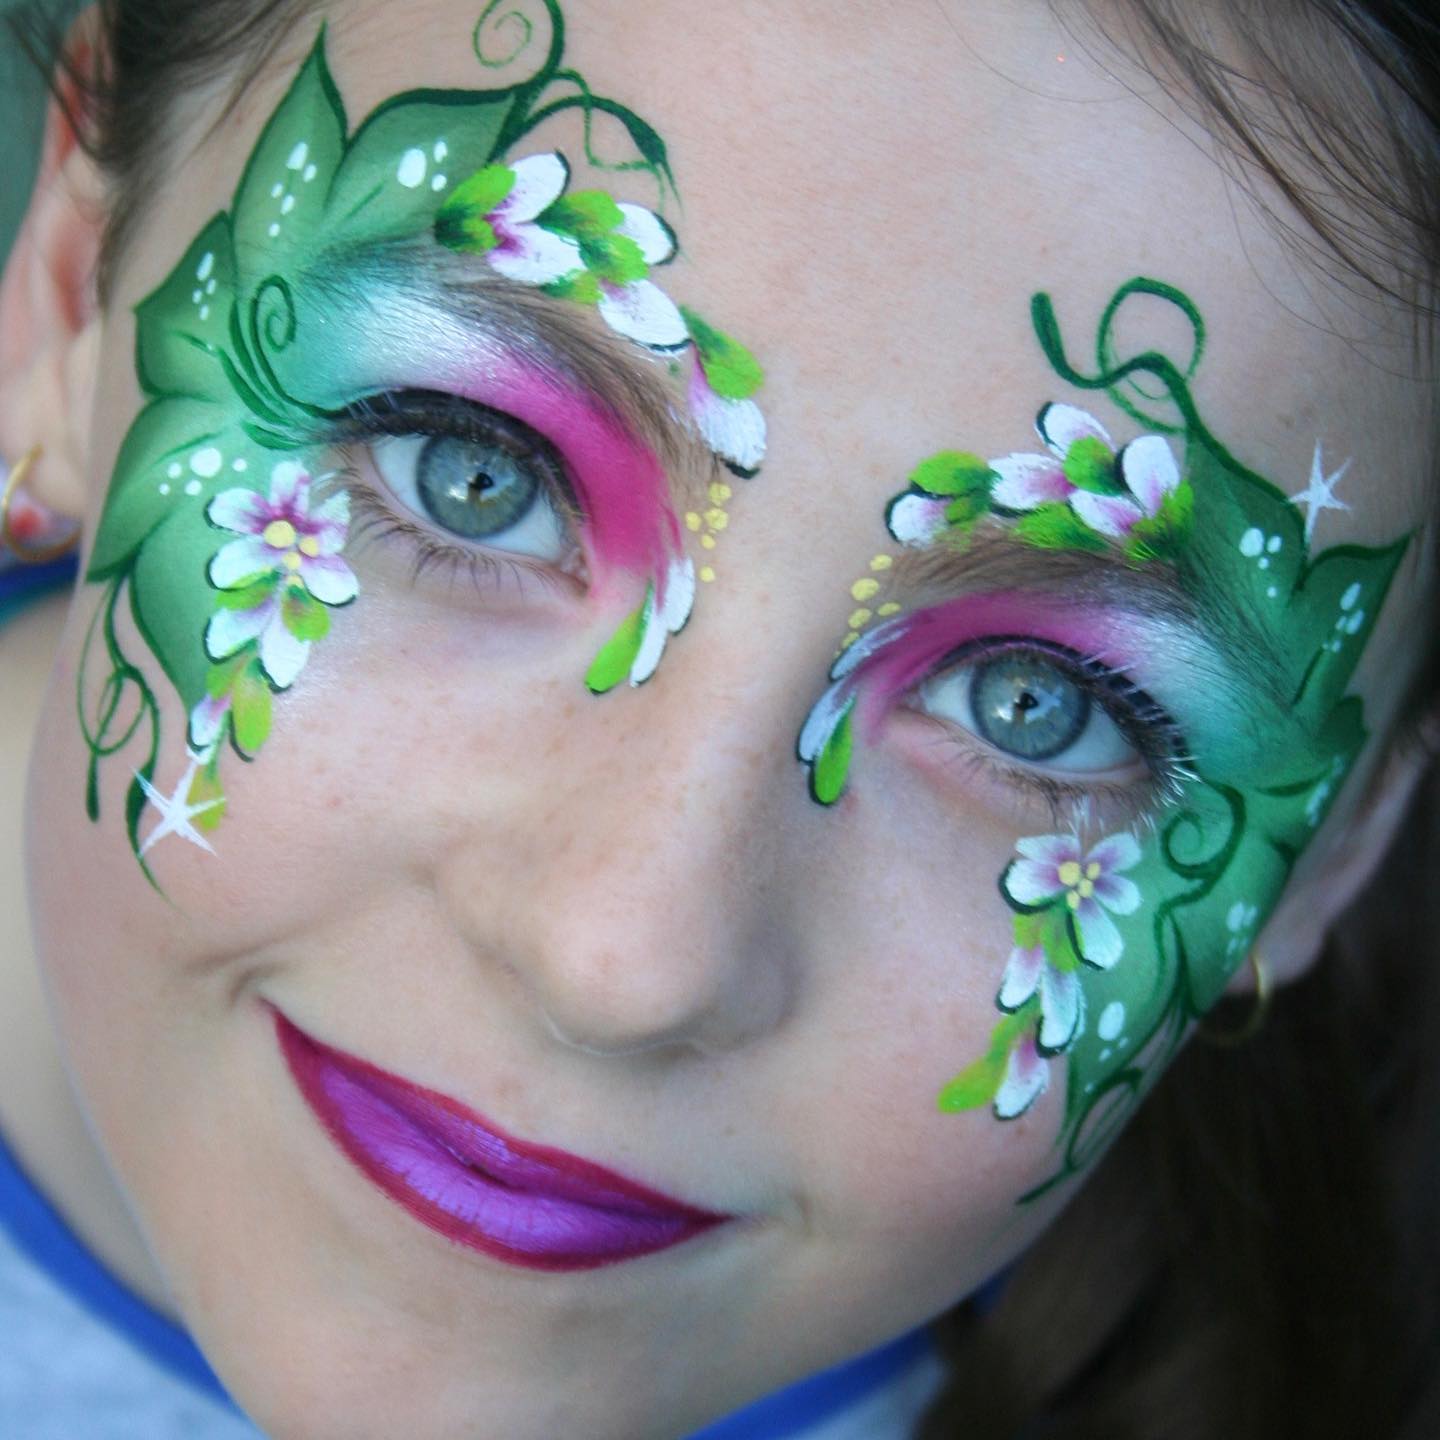 Throwback Thursday - this time from 2013 on my own gorgeous girl 💕

#throwbackthursday 
#facepainter #facepainting #melbournefacepainter #melbournefacepainting 
#facepaintingmelbourne #butterflyfacepainting #looneybinproducts #melbournekidsparties #facepaintersofinstagram #onestrokefacepainting #melbourneballoontwister #balloontwistingmelbourne
#fairypartymelbourne 
#lovemyjob